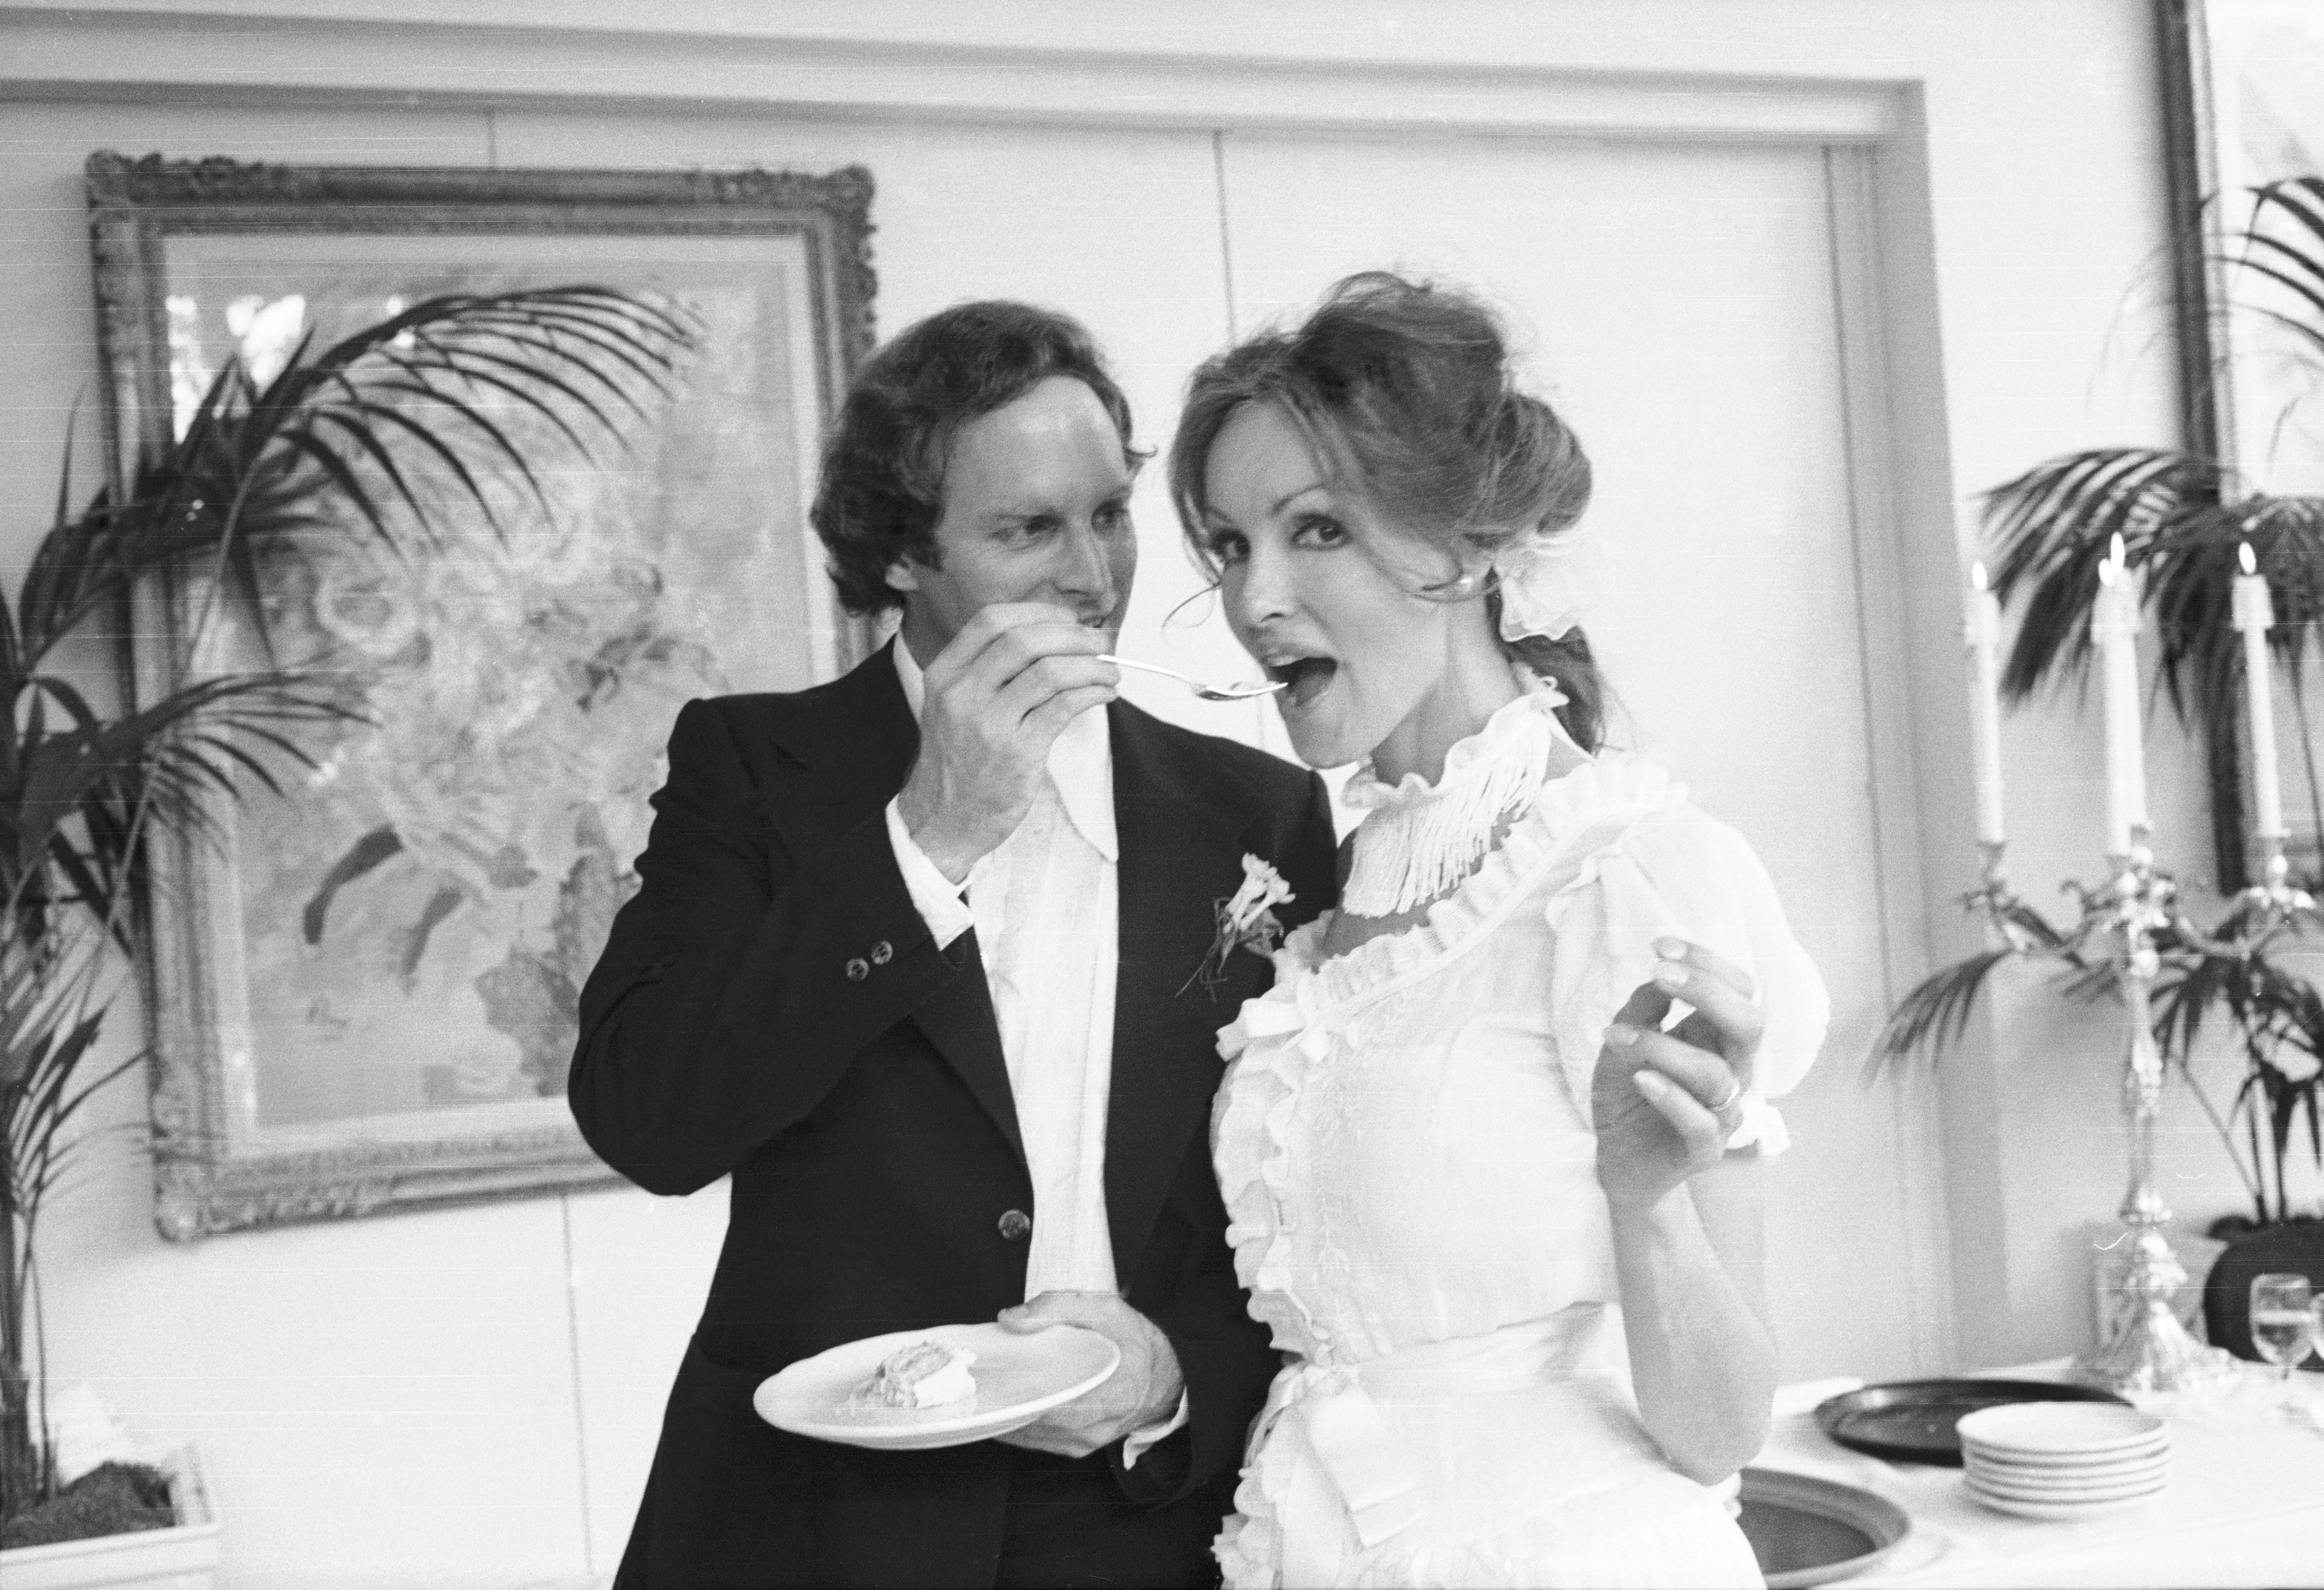 American actress Julie Newmar looks to the camera as lawyer J. Holt Smith feeds her cake at the reception following their wedding, New York, New York, August 5, 1977. | Source: Getty Images